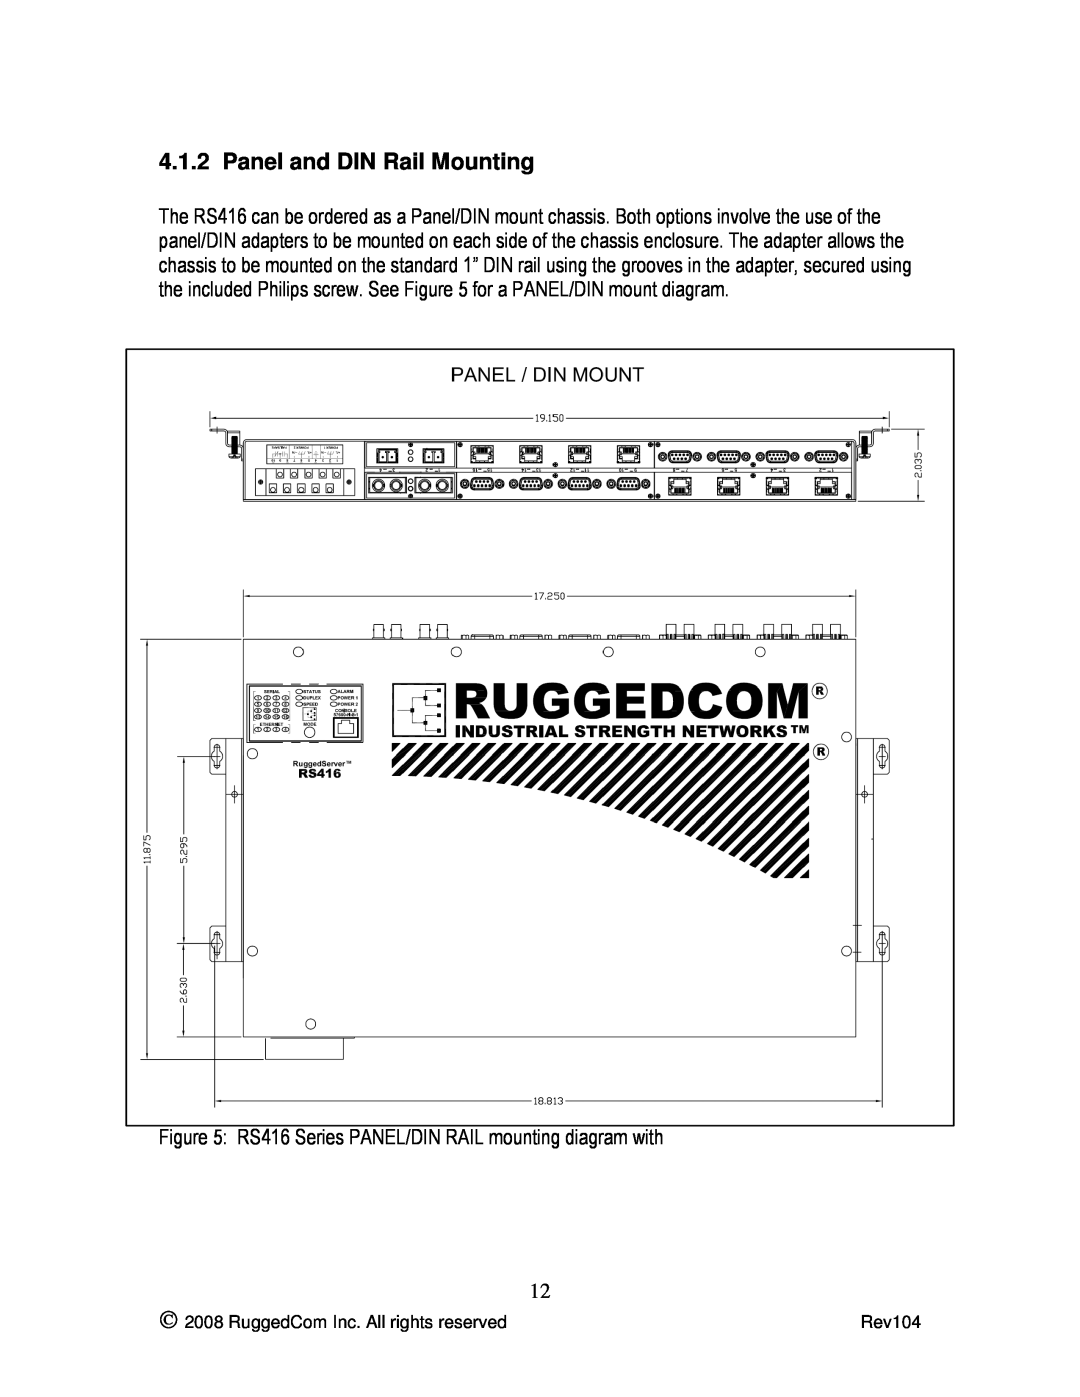 Rugged Outback manual Panel and DIN Rail Mounting, RS416 Series PANEL/DIN RAIL mounting diagram with 